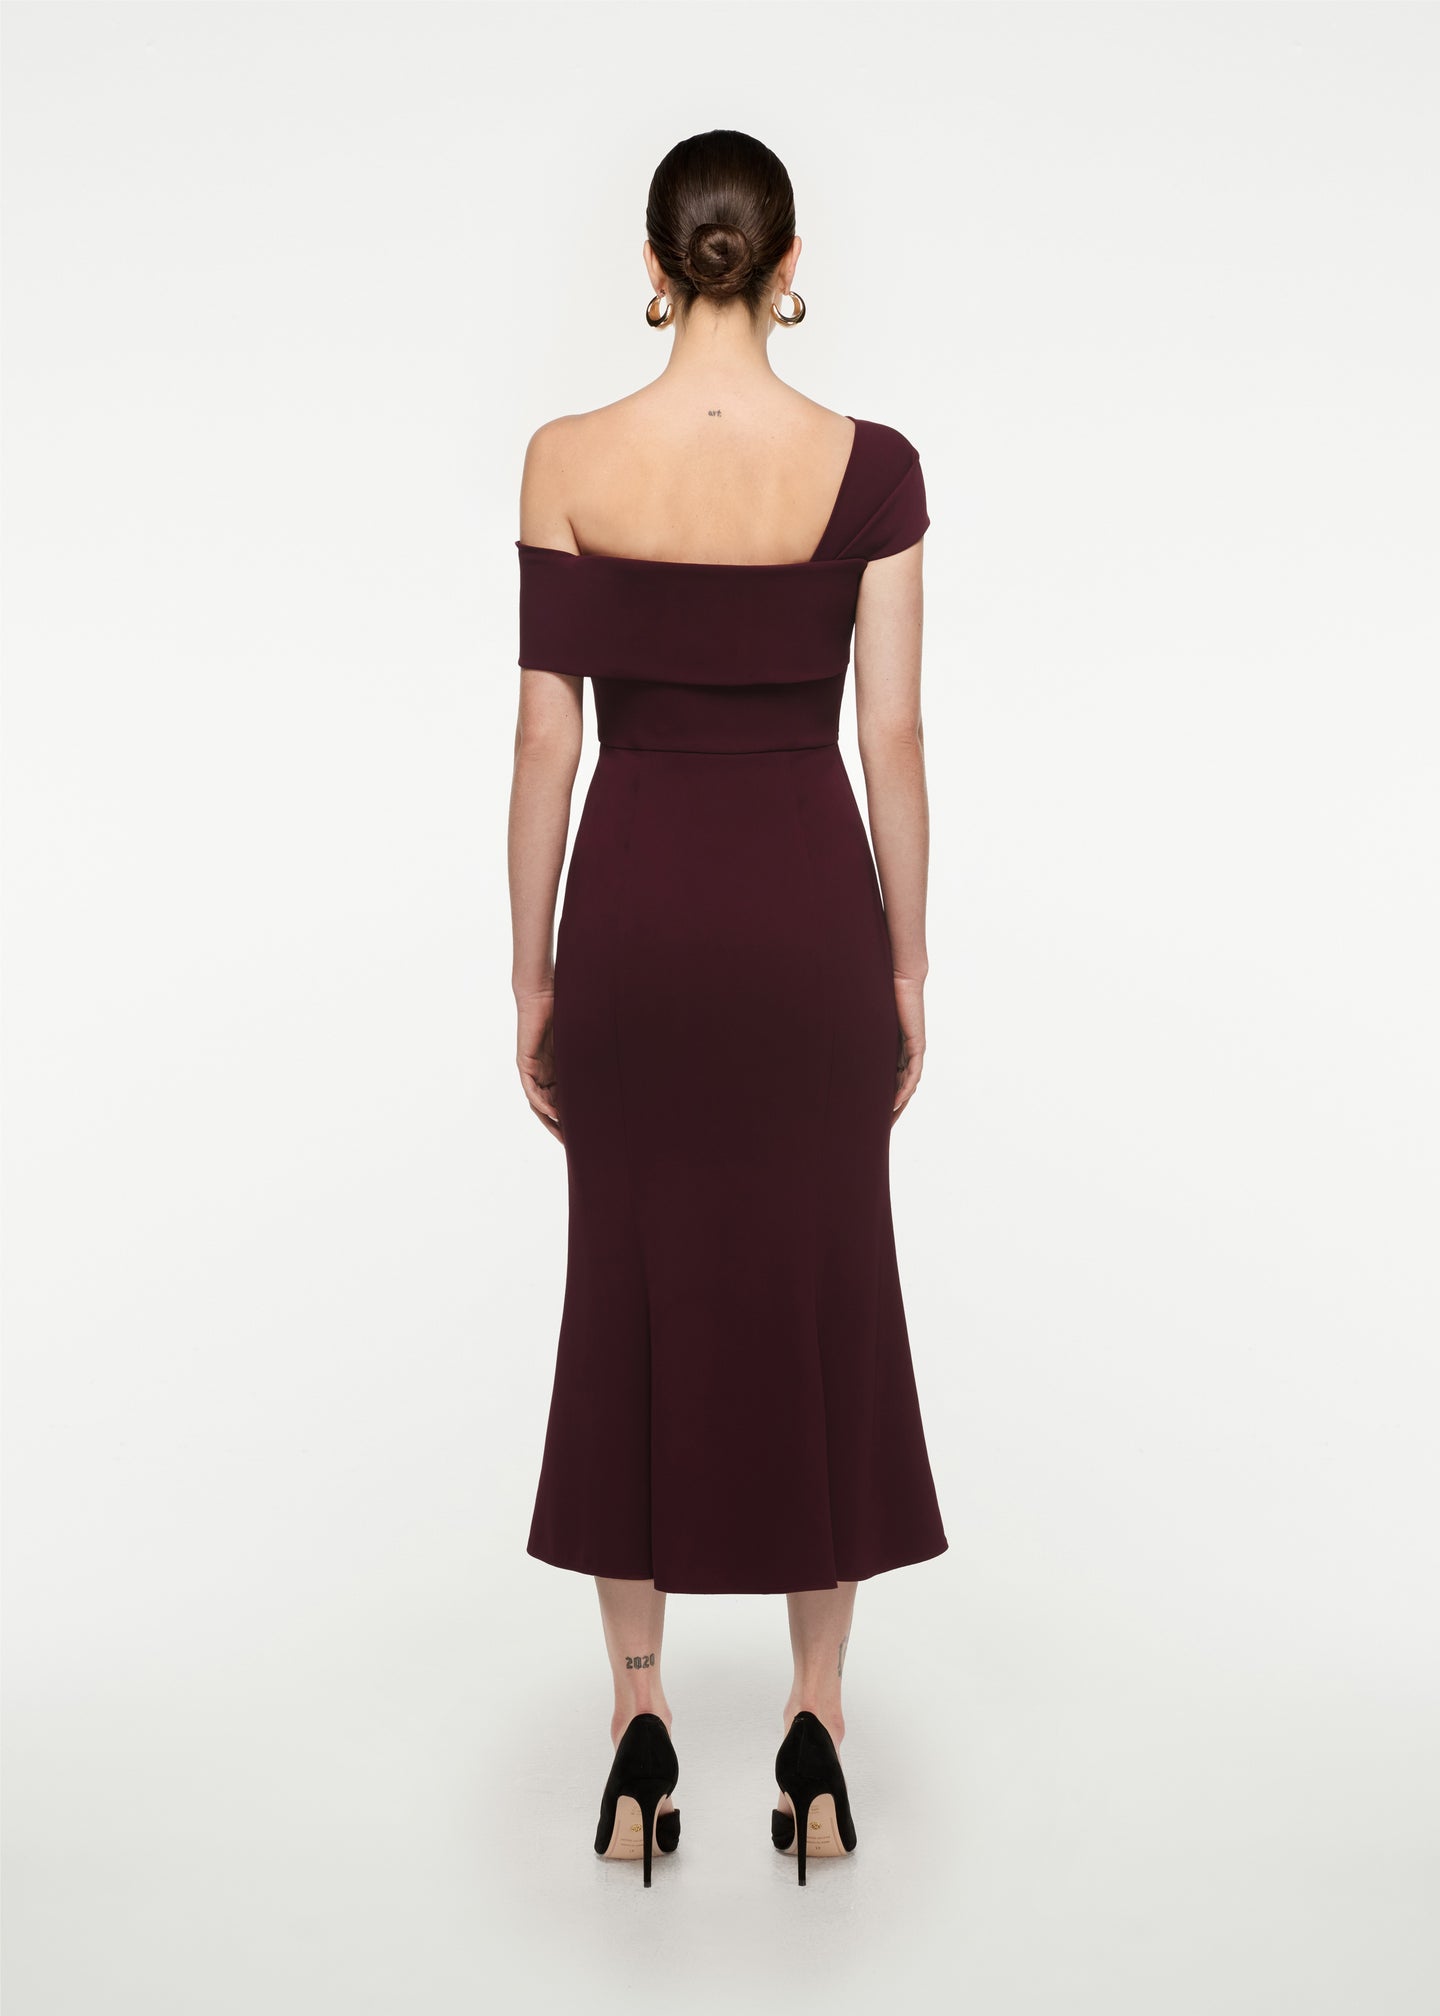 The back of a woman wearing the Asymmetric Stretch Cady Midi Dress in Maroon